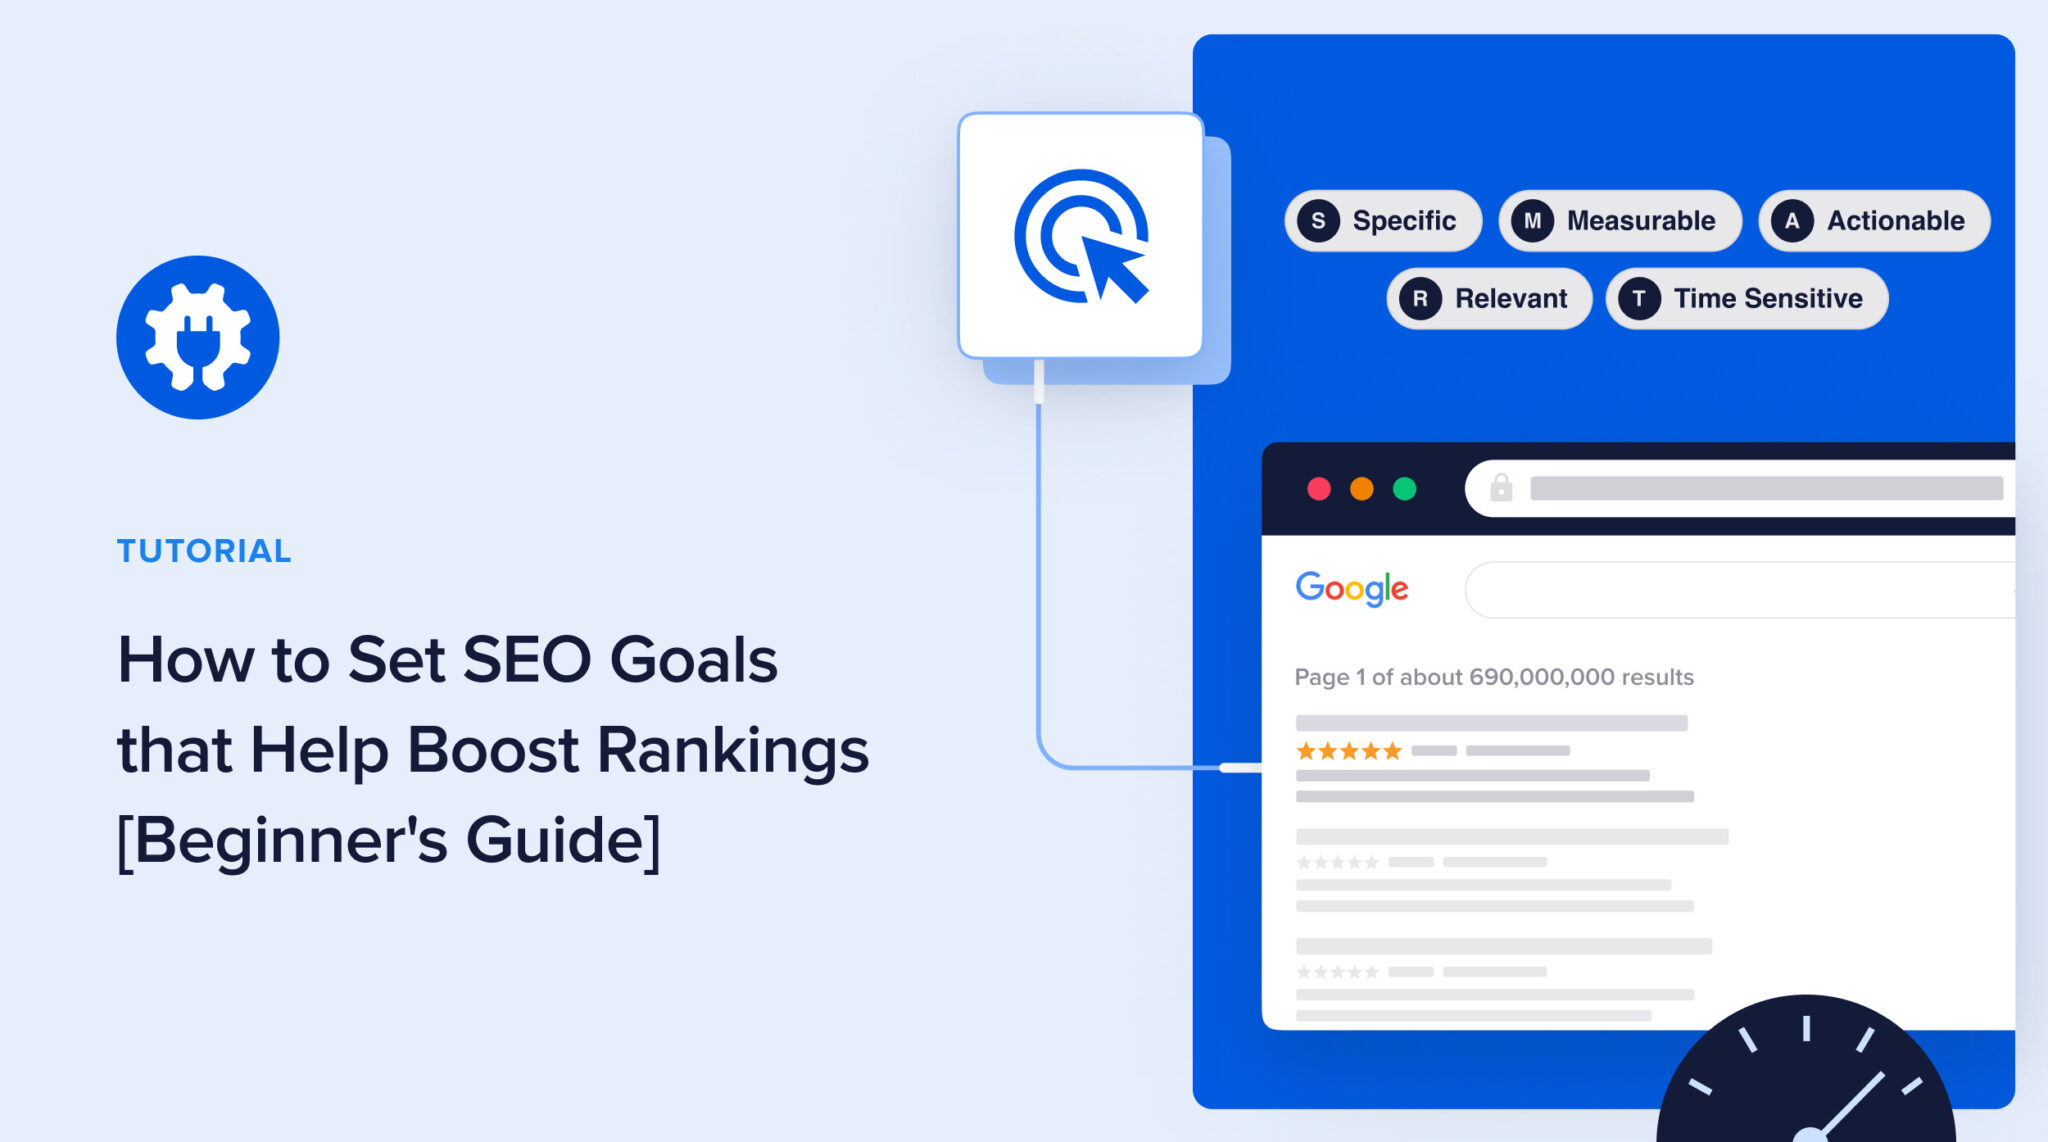 How to Set SEO Goals that Help Boost Rankings